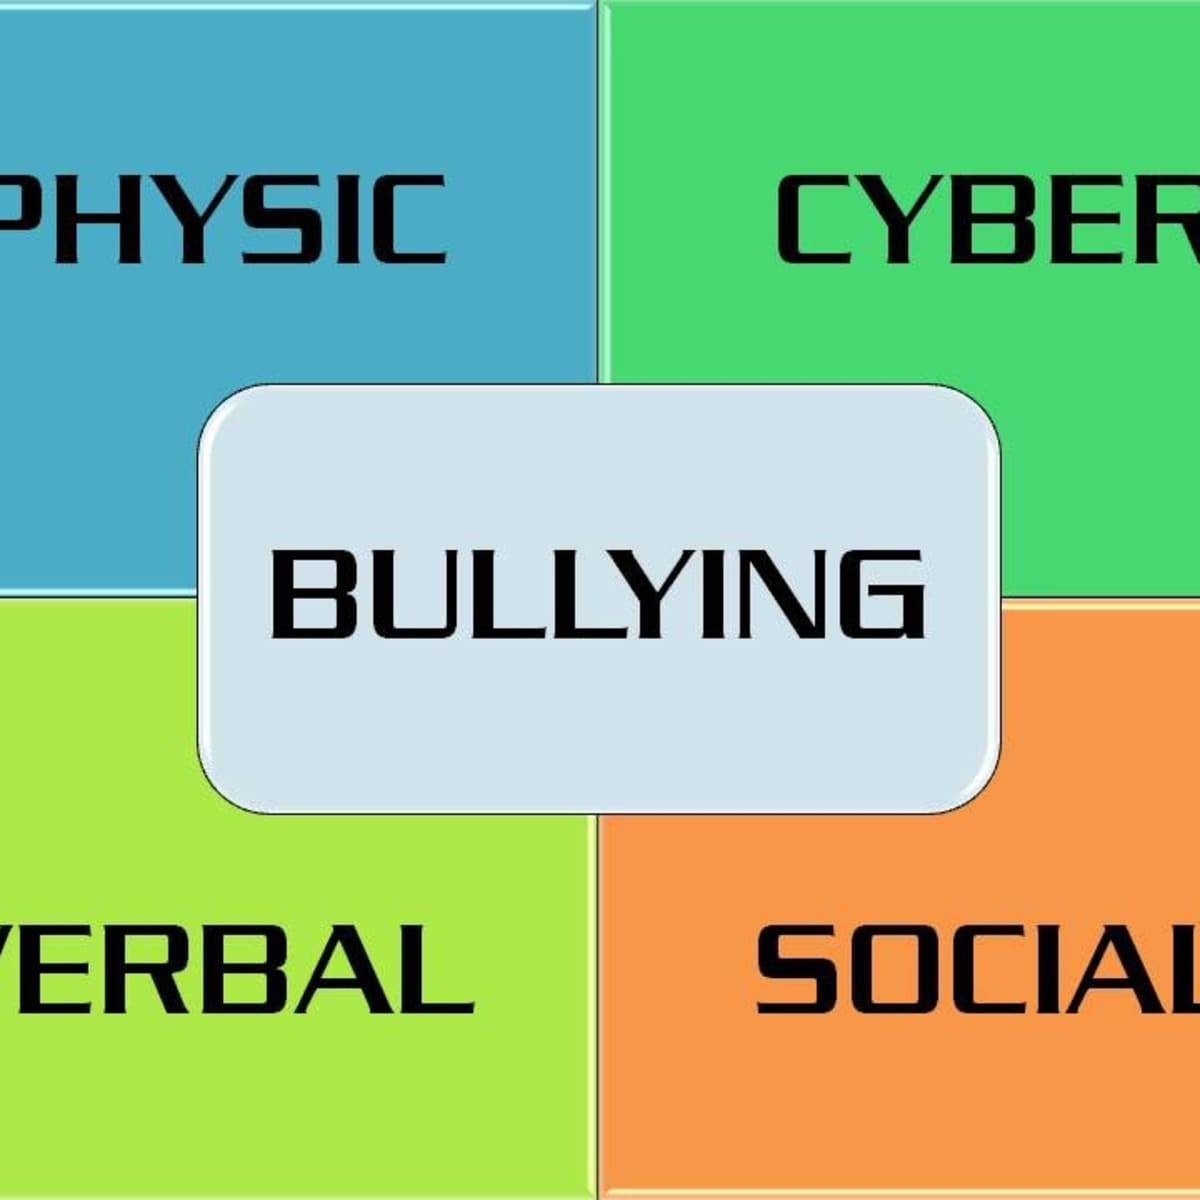 The most common types of school bullying